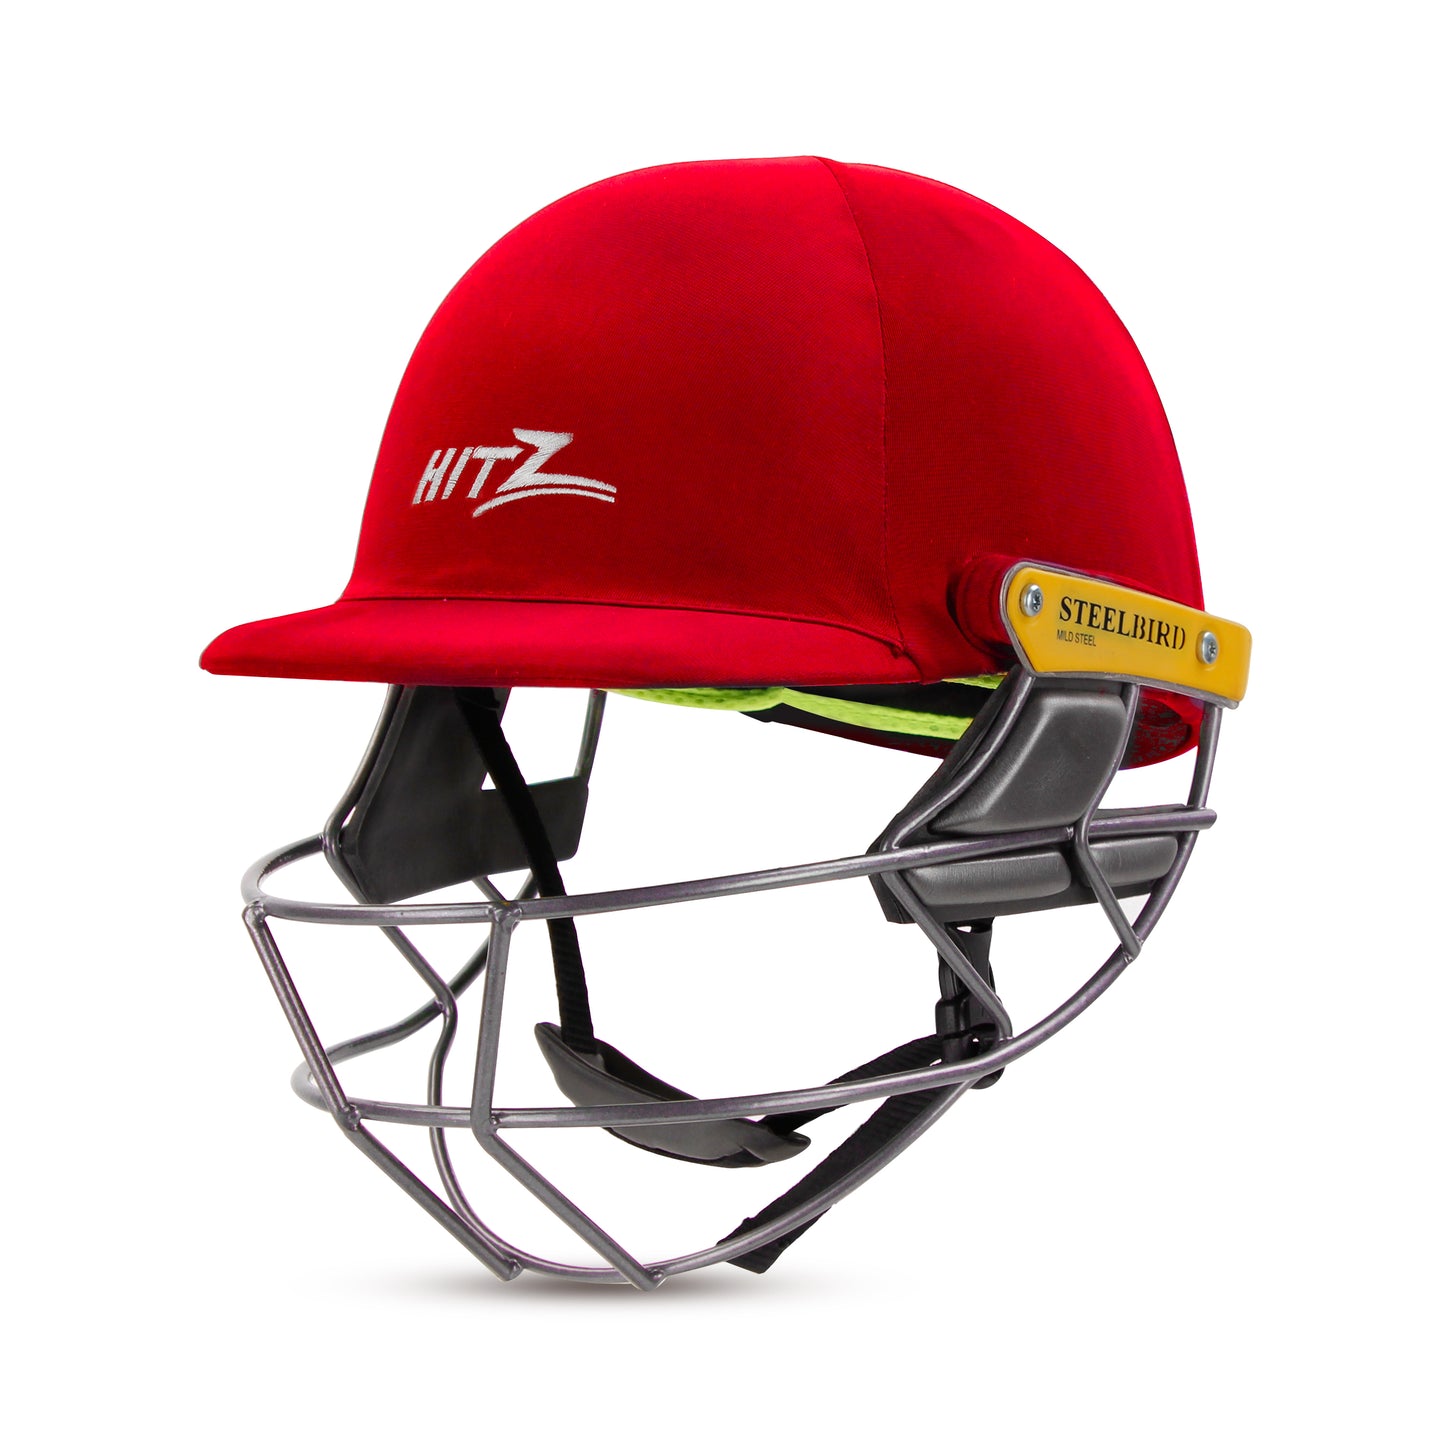 Steelbird Hitz Mild Steel Premium Cricket Helmet for Men & Boys with Neck Guard (Fixed Spring Steel Grill | Light Weight) (Red Fabric with Green Interior)